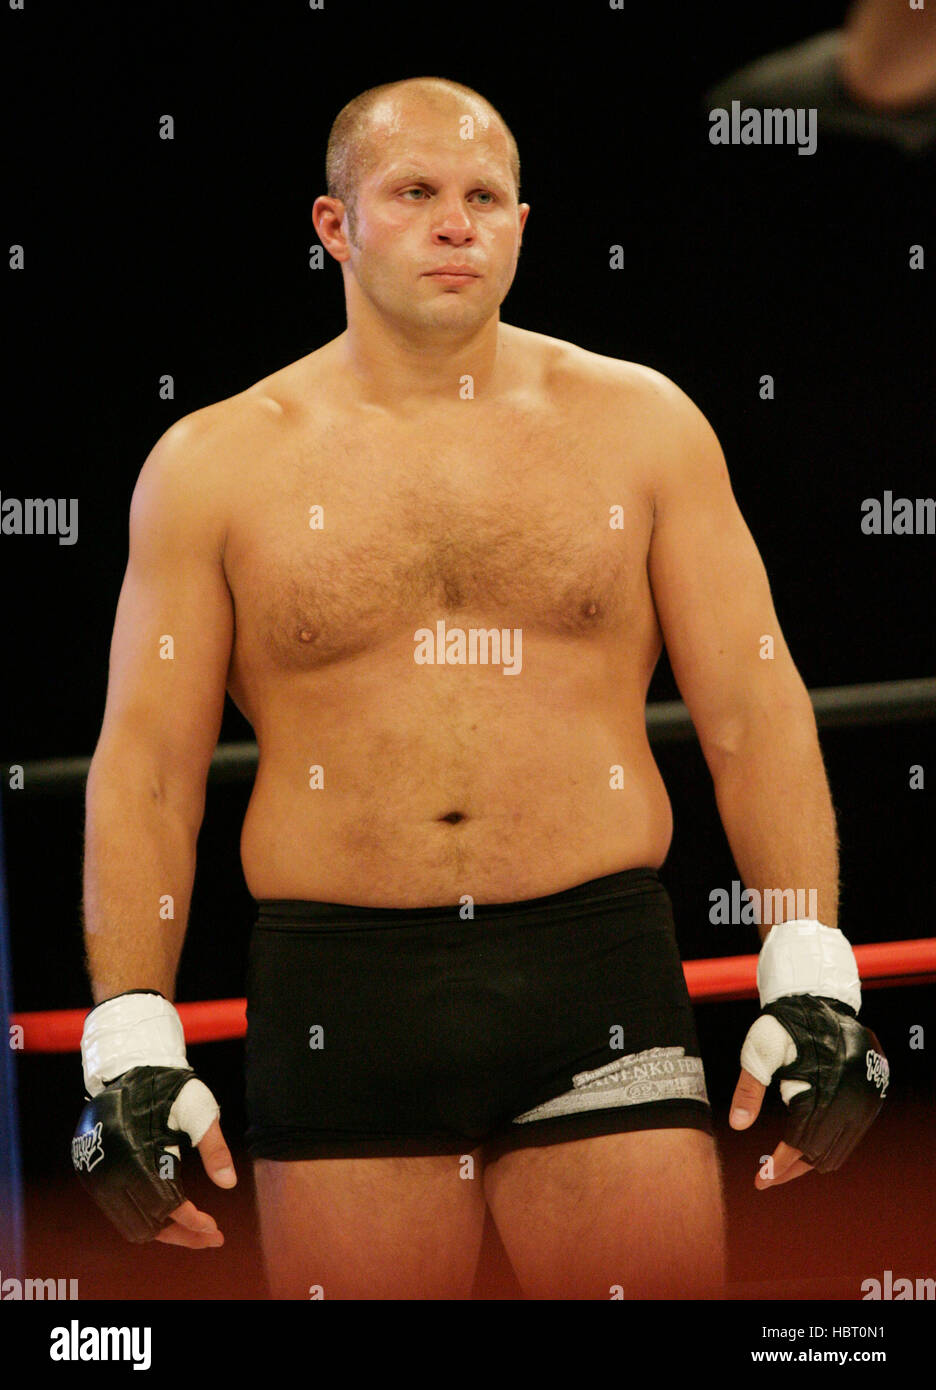 Fedor Emelianenko before his fight against Tim Sylvia at Affliction's 'Banned', a mixed martial arts fight at the Honda Center on July 19, 2008 in Anaheim, California. Francis Specker Stock Photo